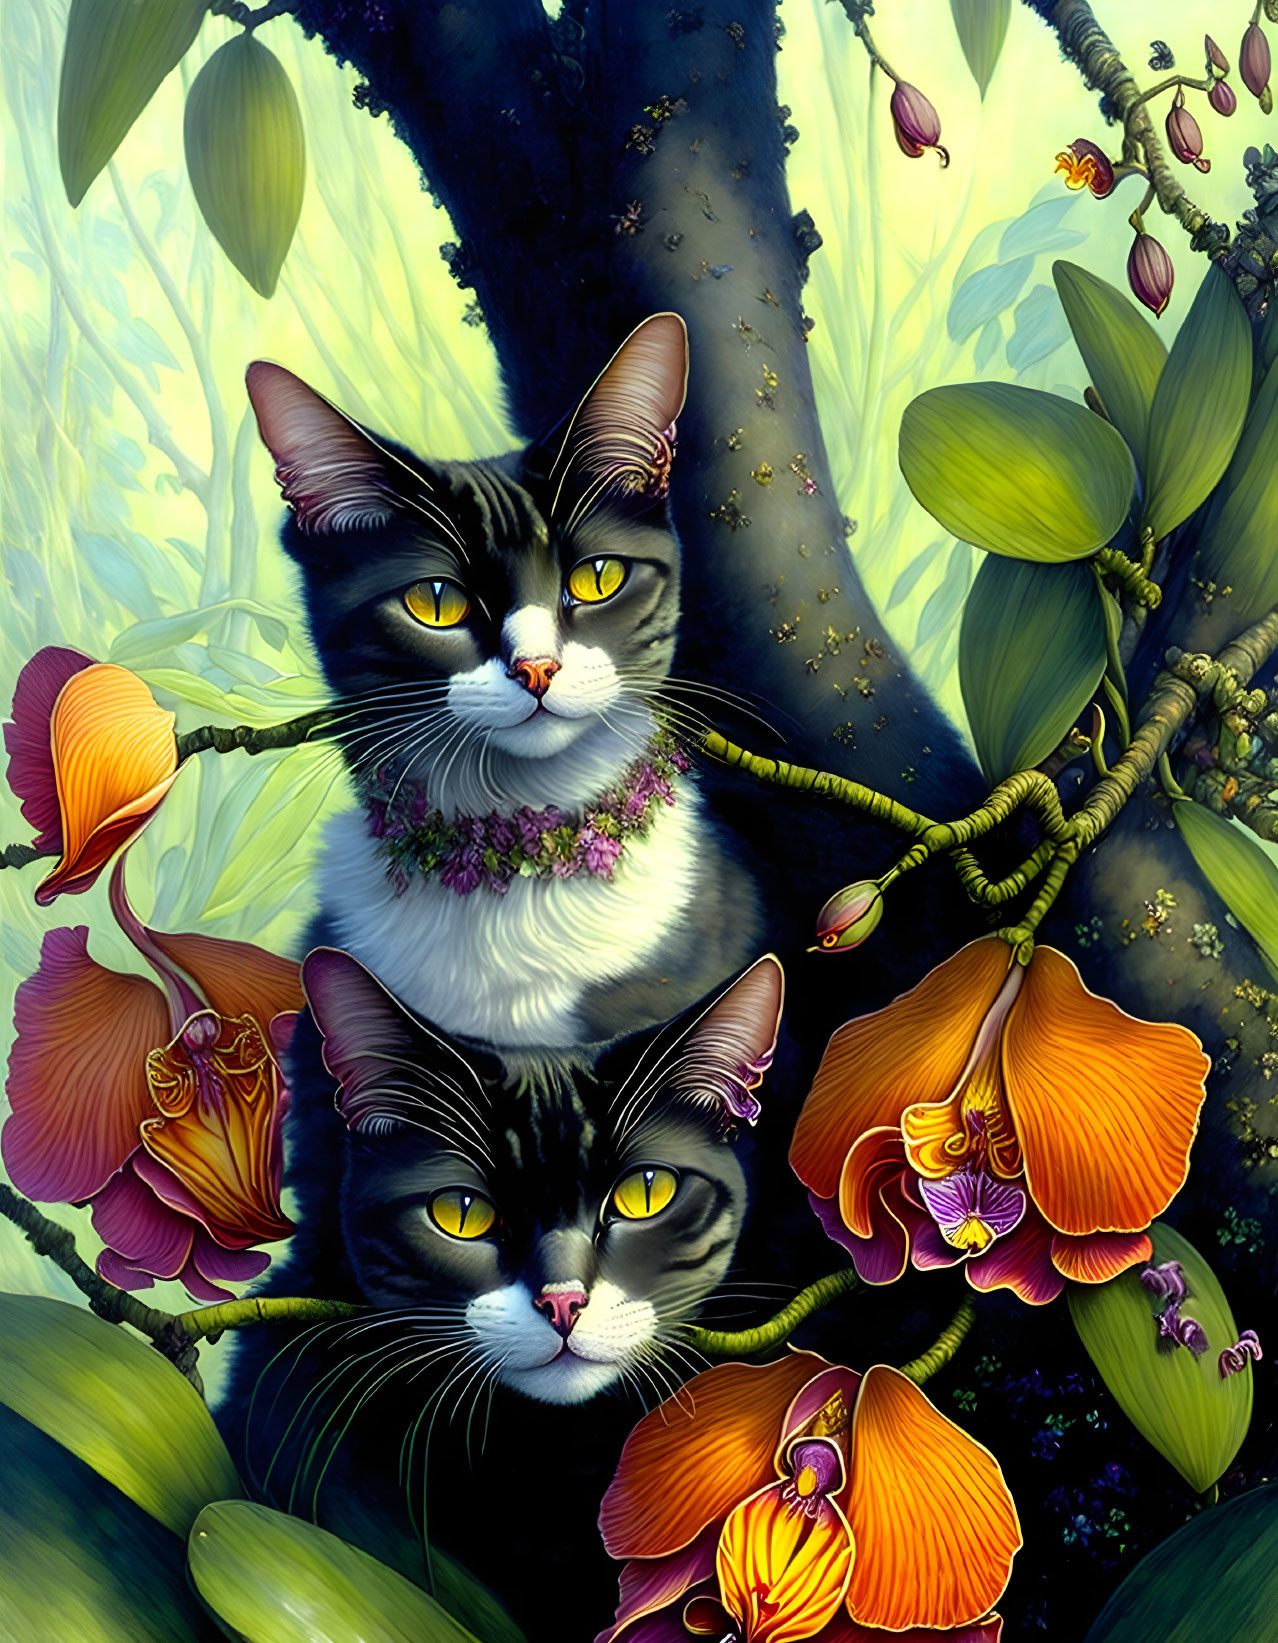 Orchid cat, Eyes all pupil, when skies turn grey. 